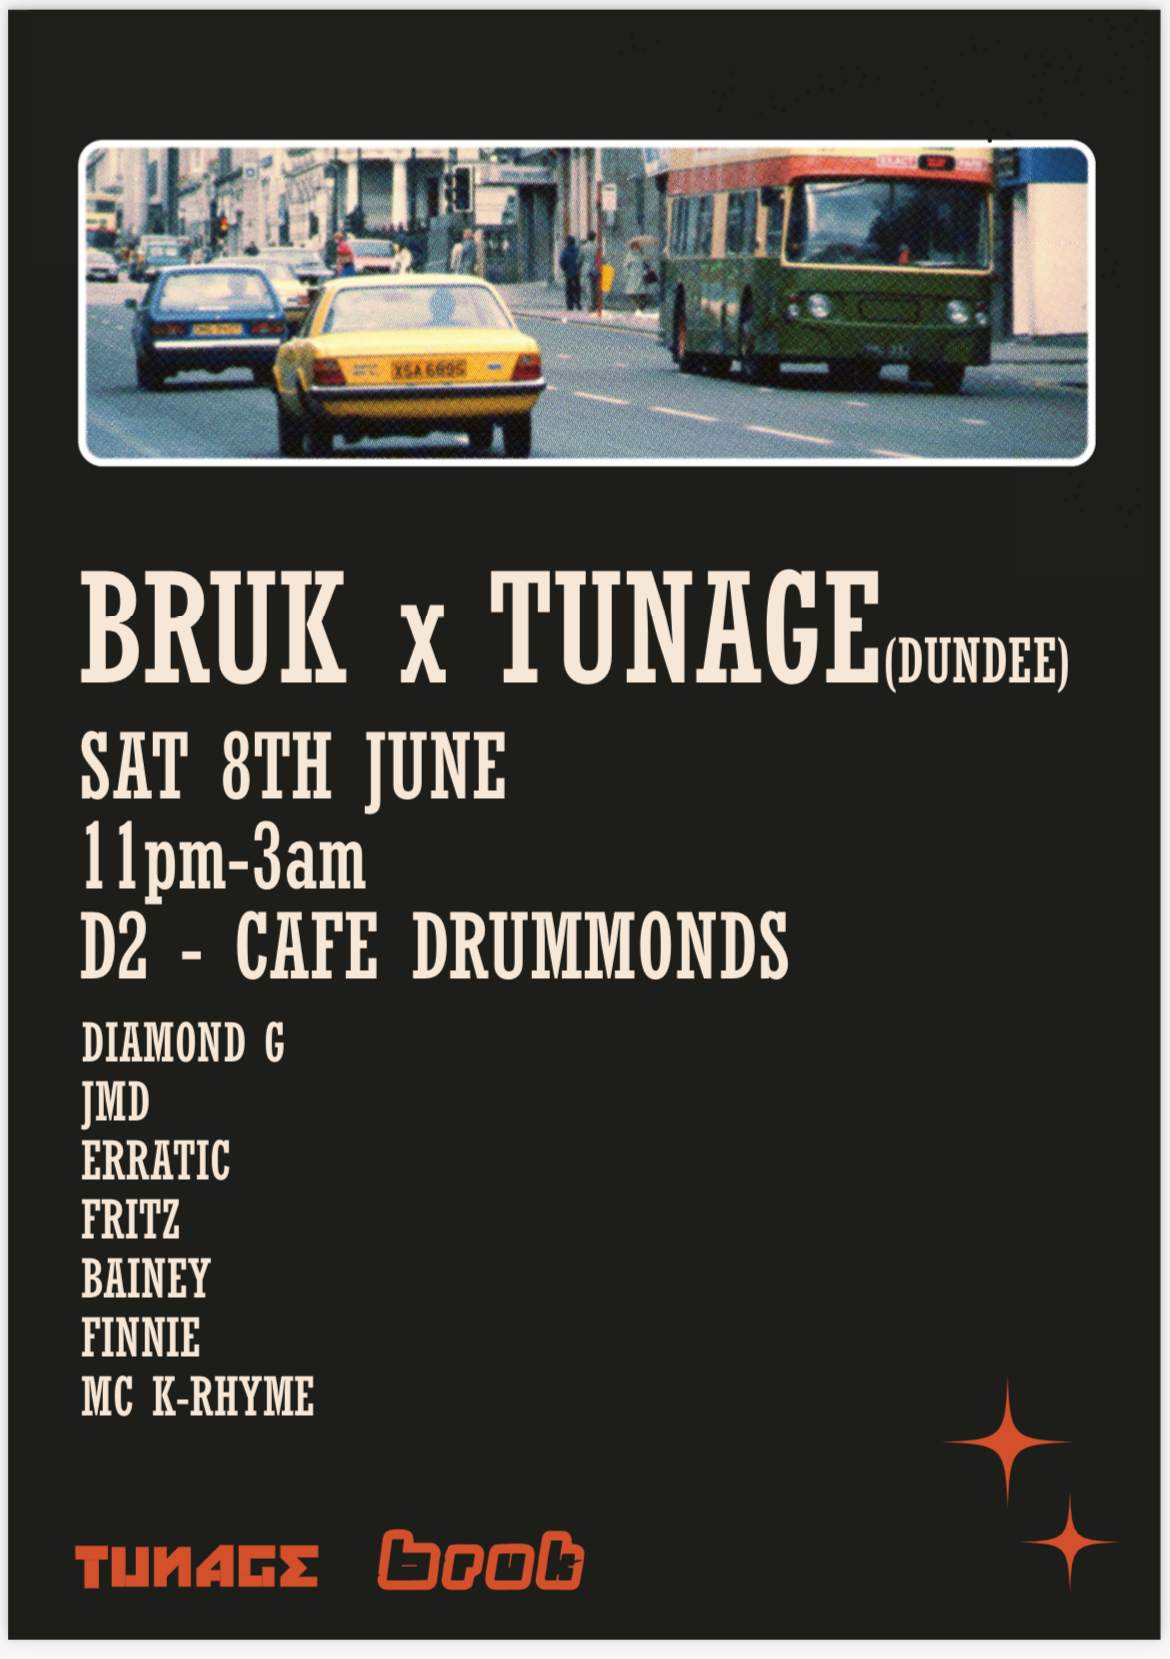 Bruk With Guests Tunage - フライヤー表